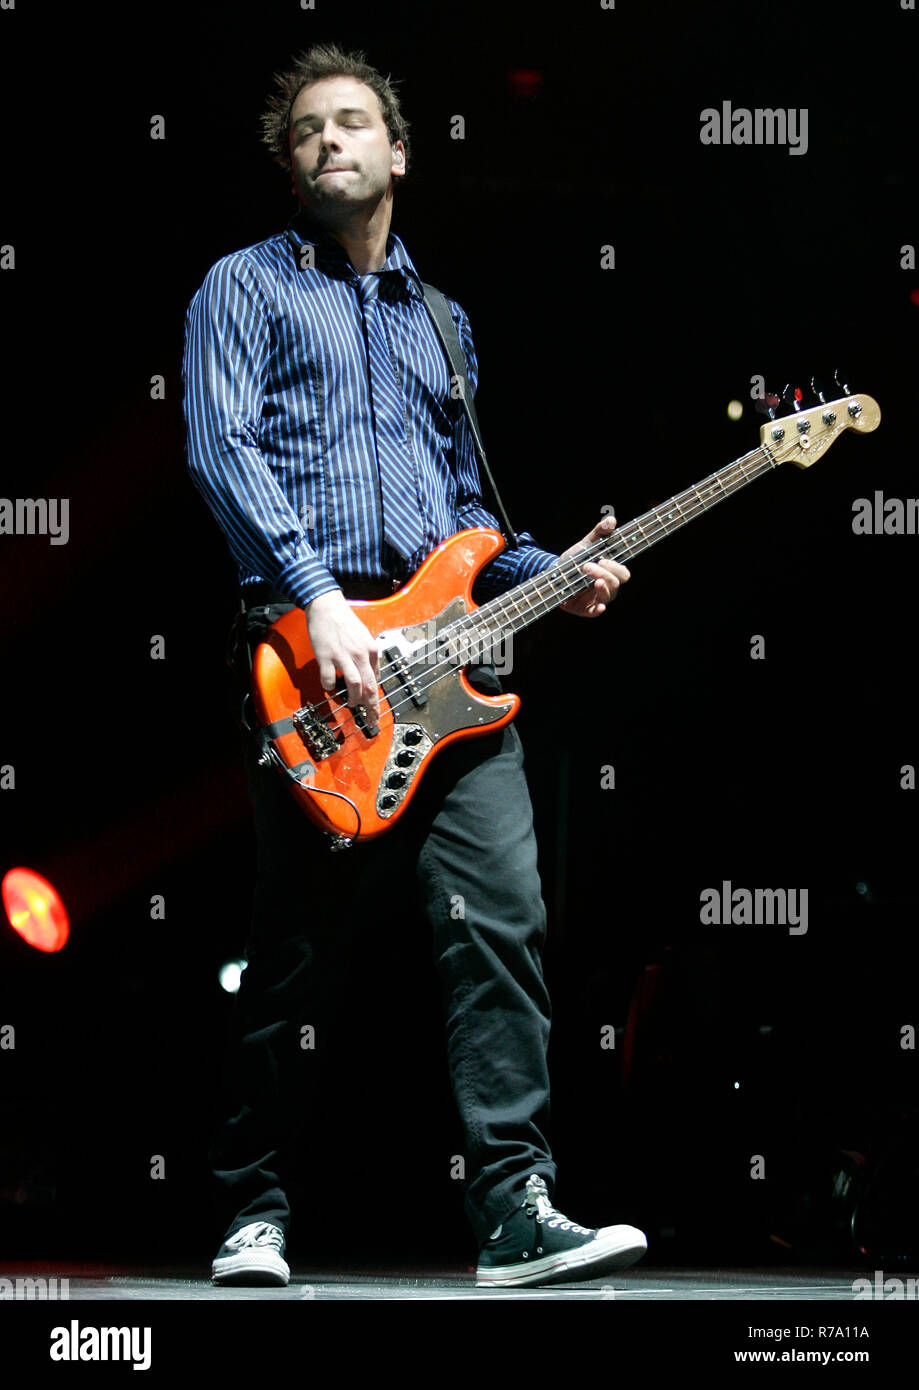 Chris Wolstenholme With Muse Performs In Concert At The Bank Atlantic Center In Sunrise Florida On April 22 07 Stock Photo Alamy